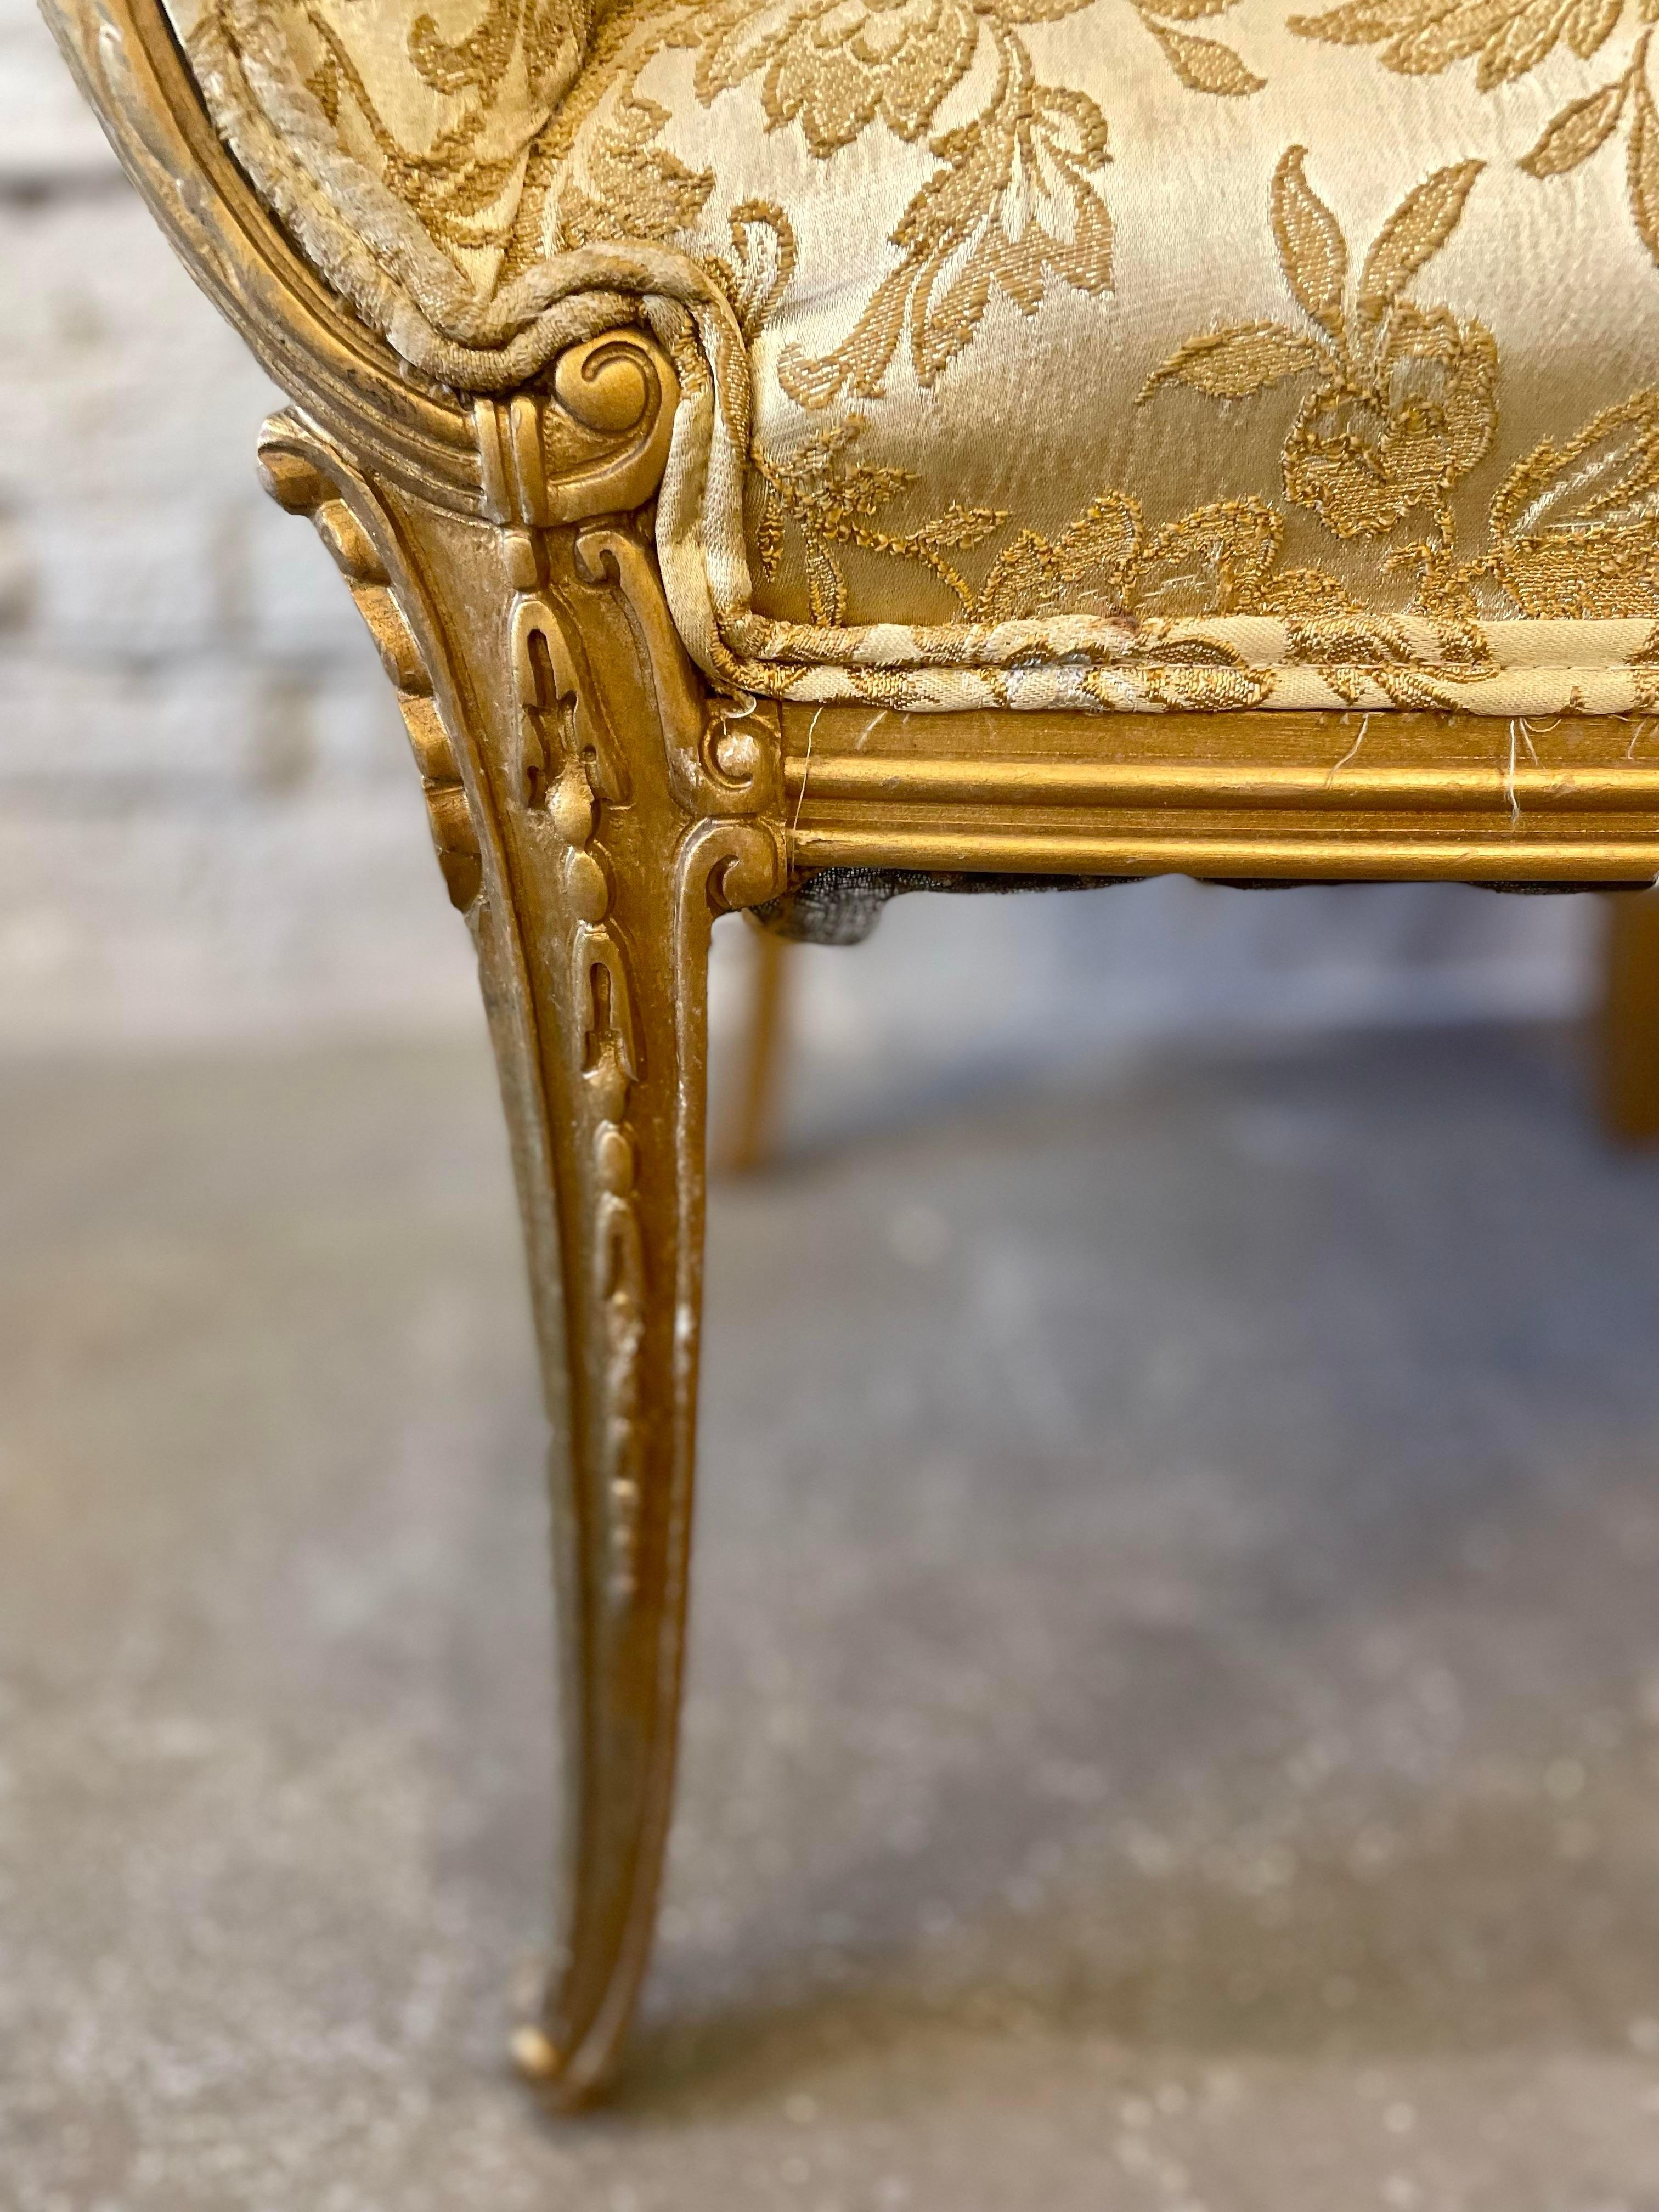 Stunning pair of chairs that are actually comfortable too. The gold gilt wood is in excellent condition as is the foam/springs/fabric. Use as is or redo as you like:) 

DIMENSIONS: 28ʺW × 24ʺD × 42ʺH  
STYLES: Hollywood Regency  
NUMBER OF SEATS: 2 